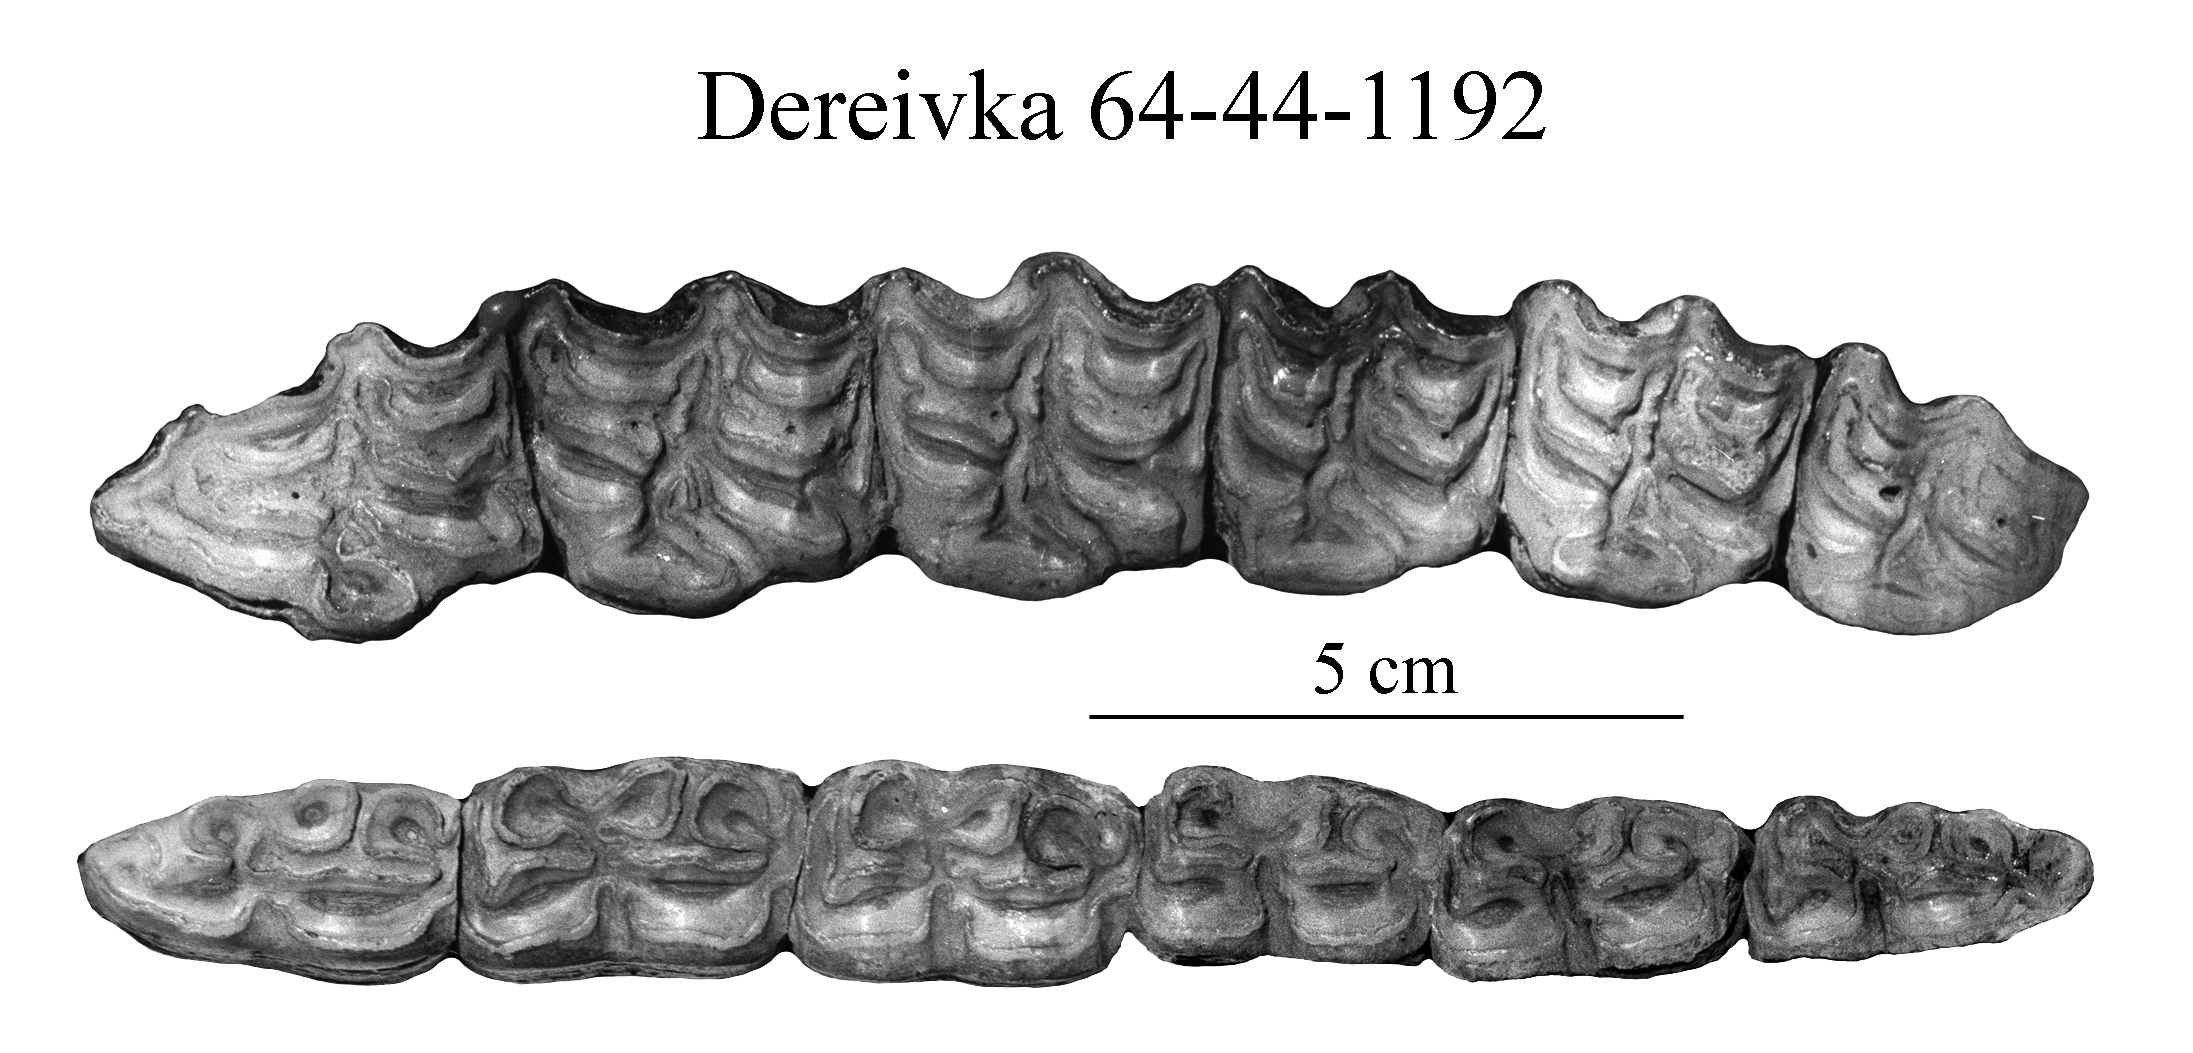 Dereivka Upper and lower dentitions